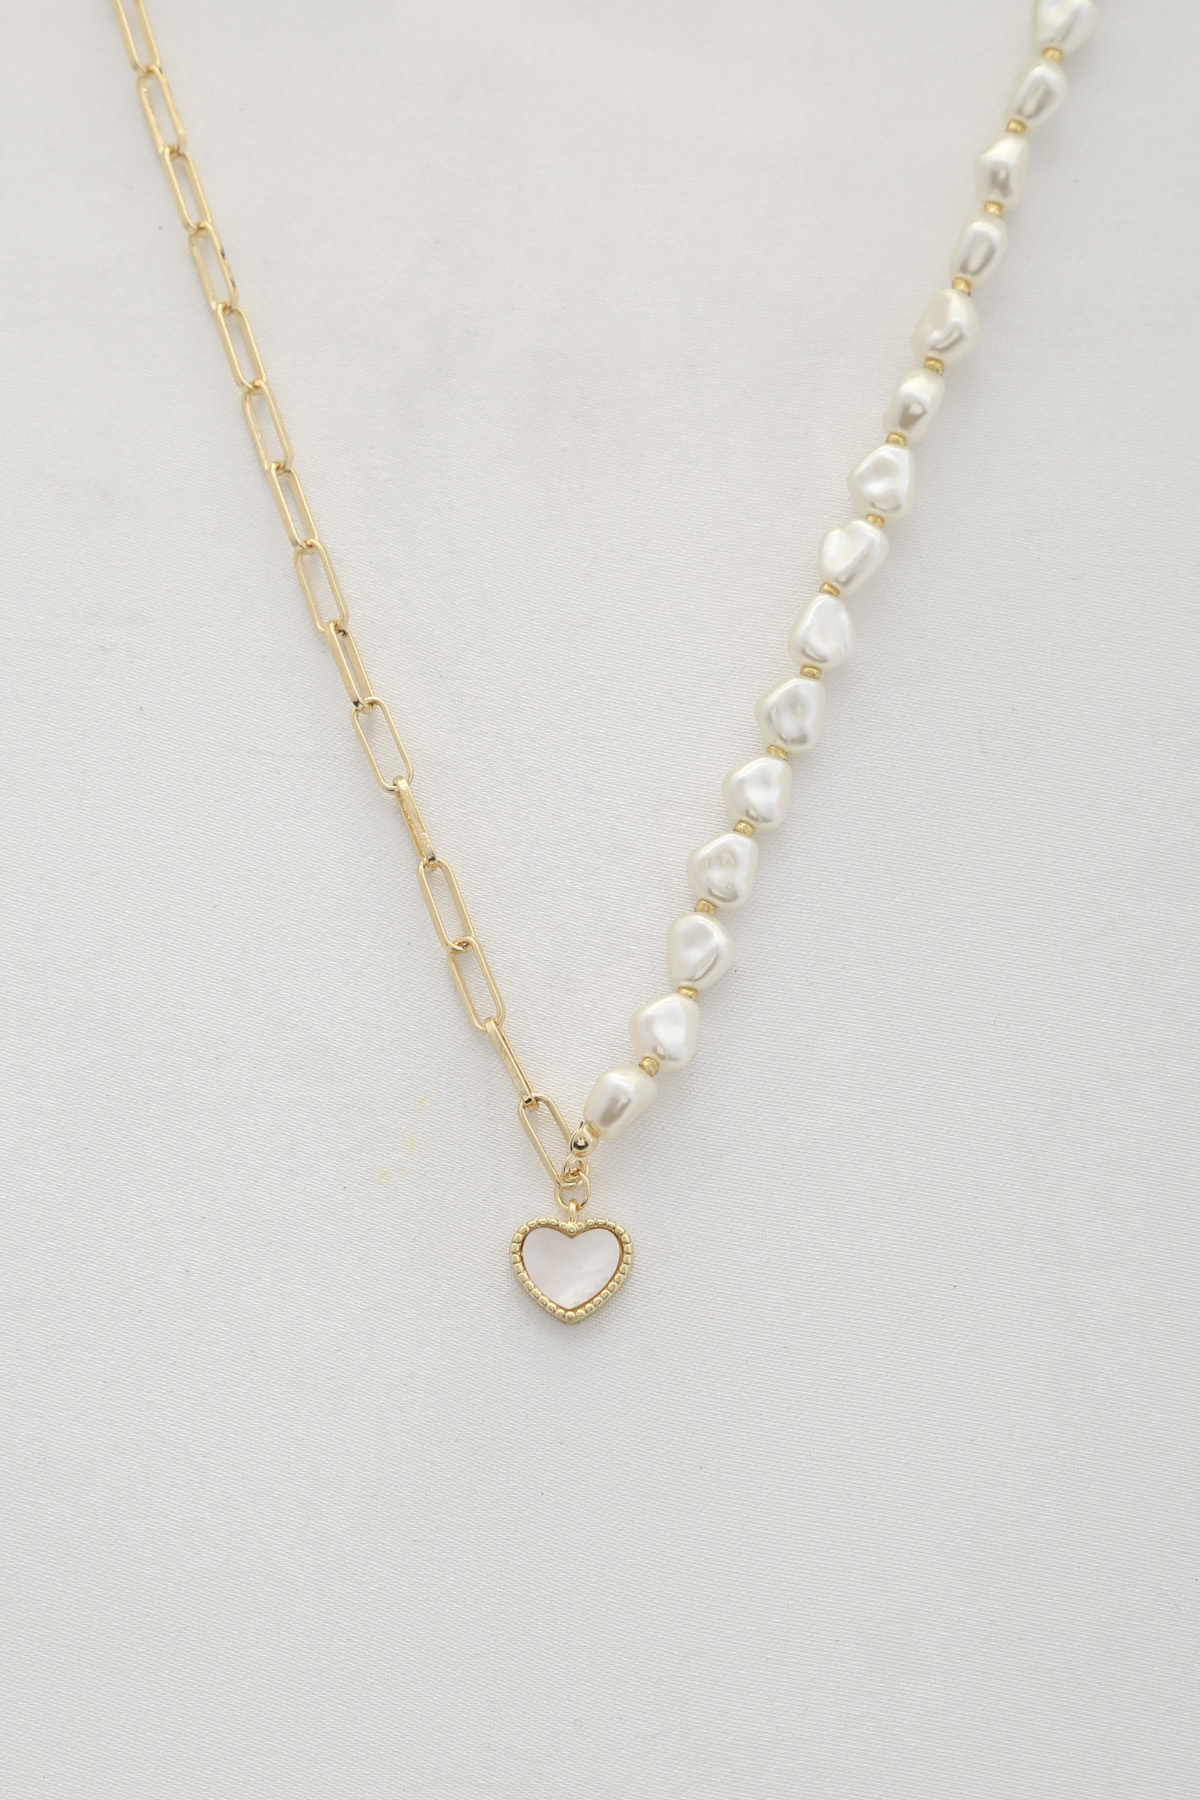 HEART CHARM PEARL BEAD OVAL LINK NECKLACE